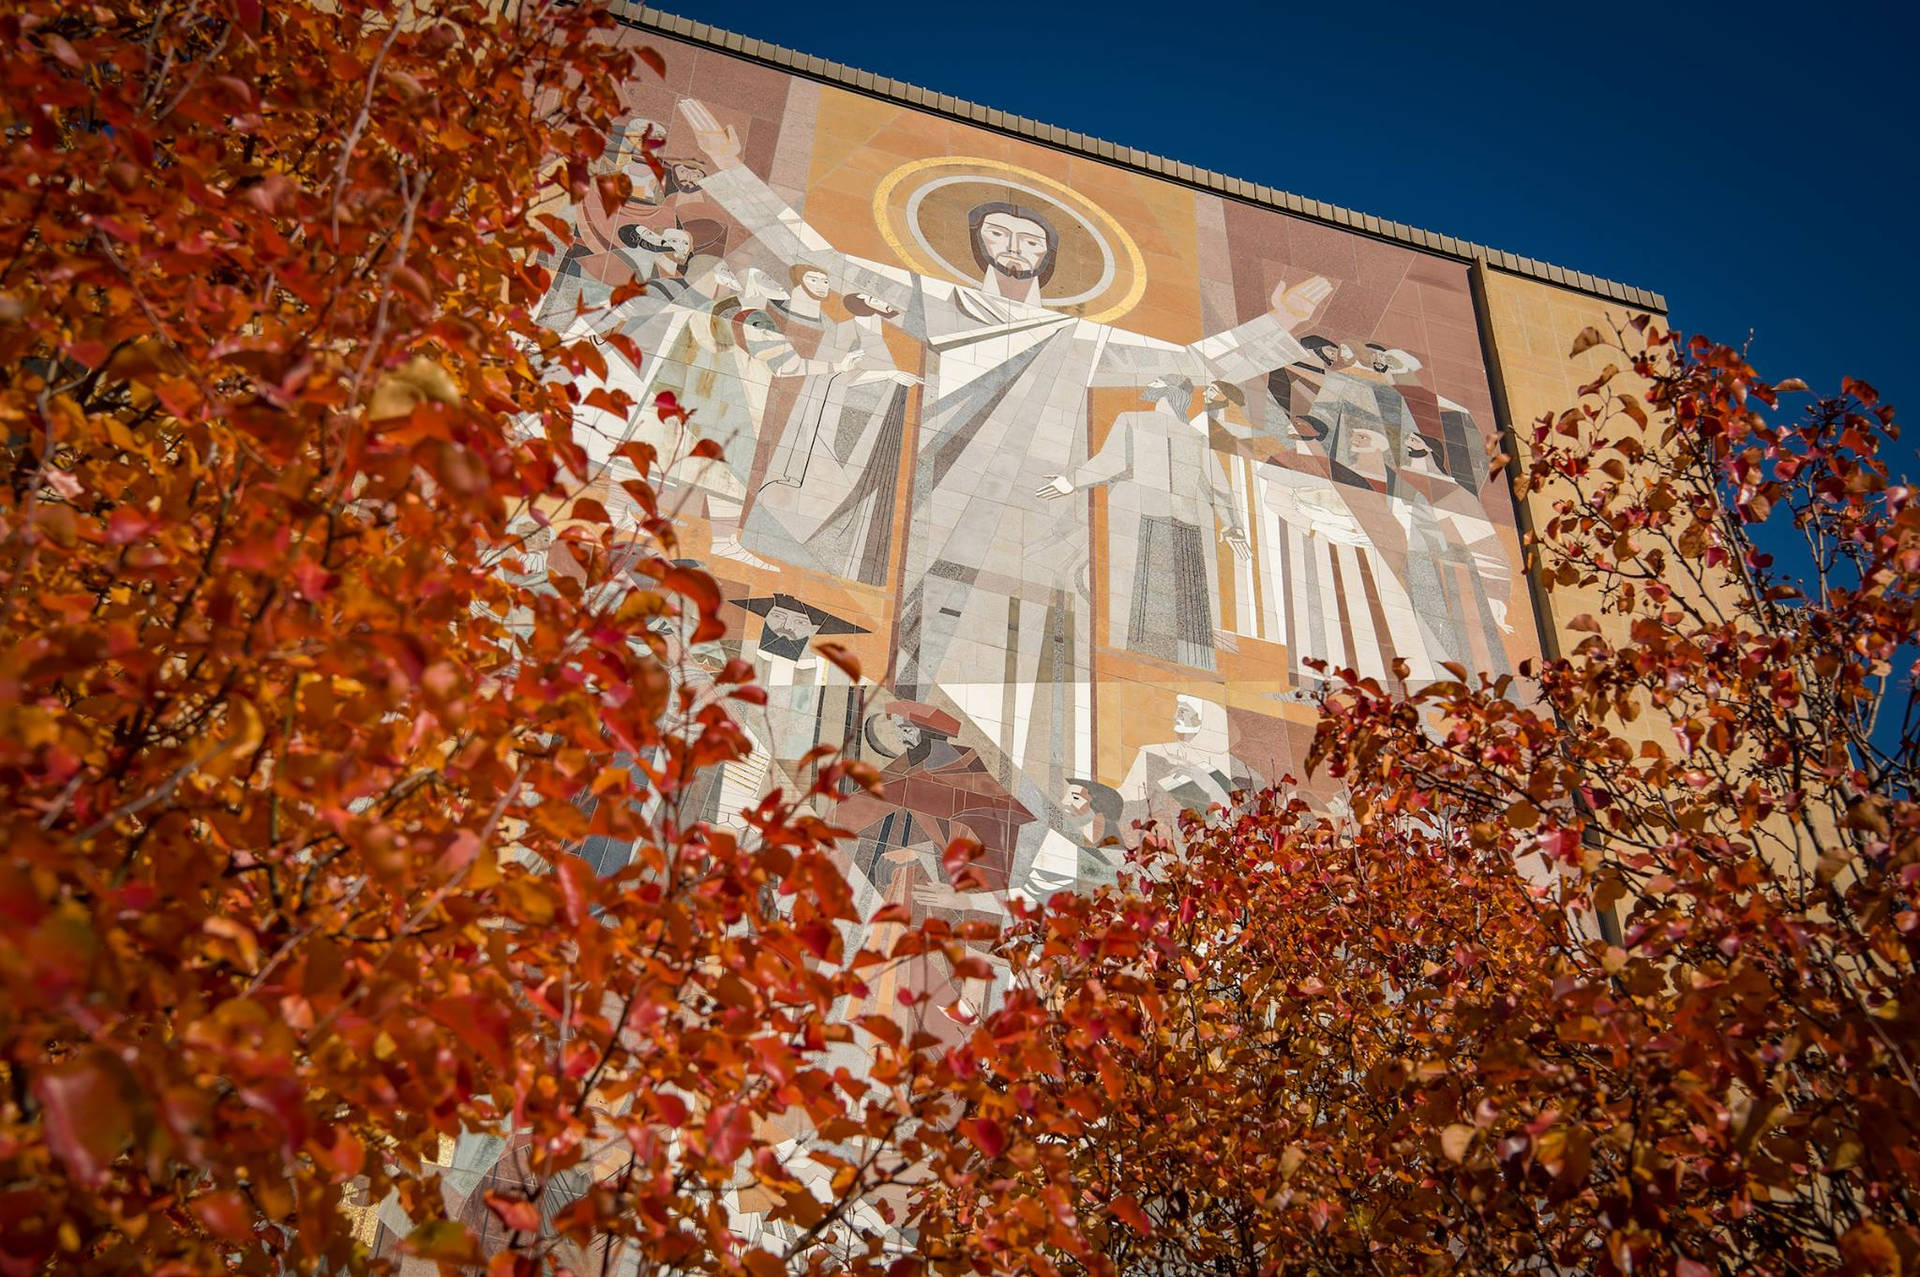 Caption: Iconic Touchdown Jesus Mural at the University of Notre Dame Wallpaper